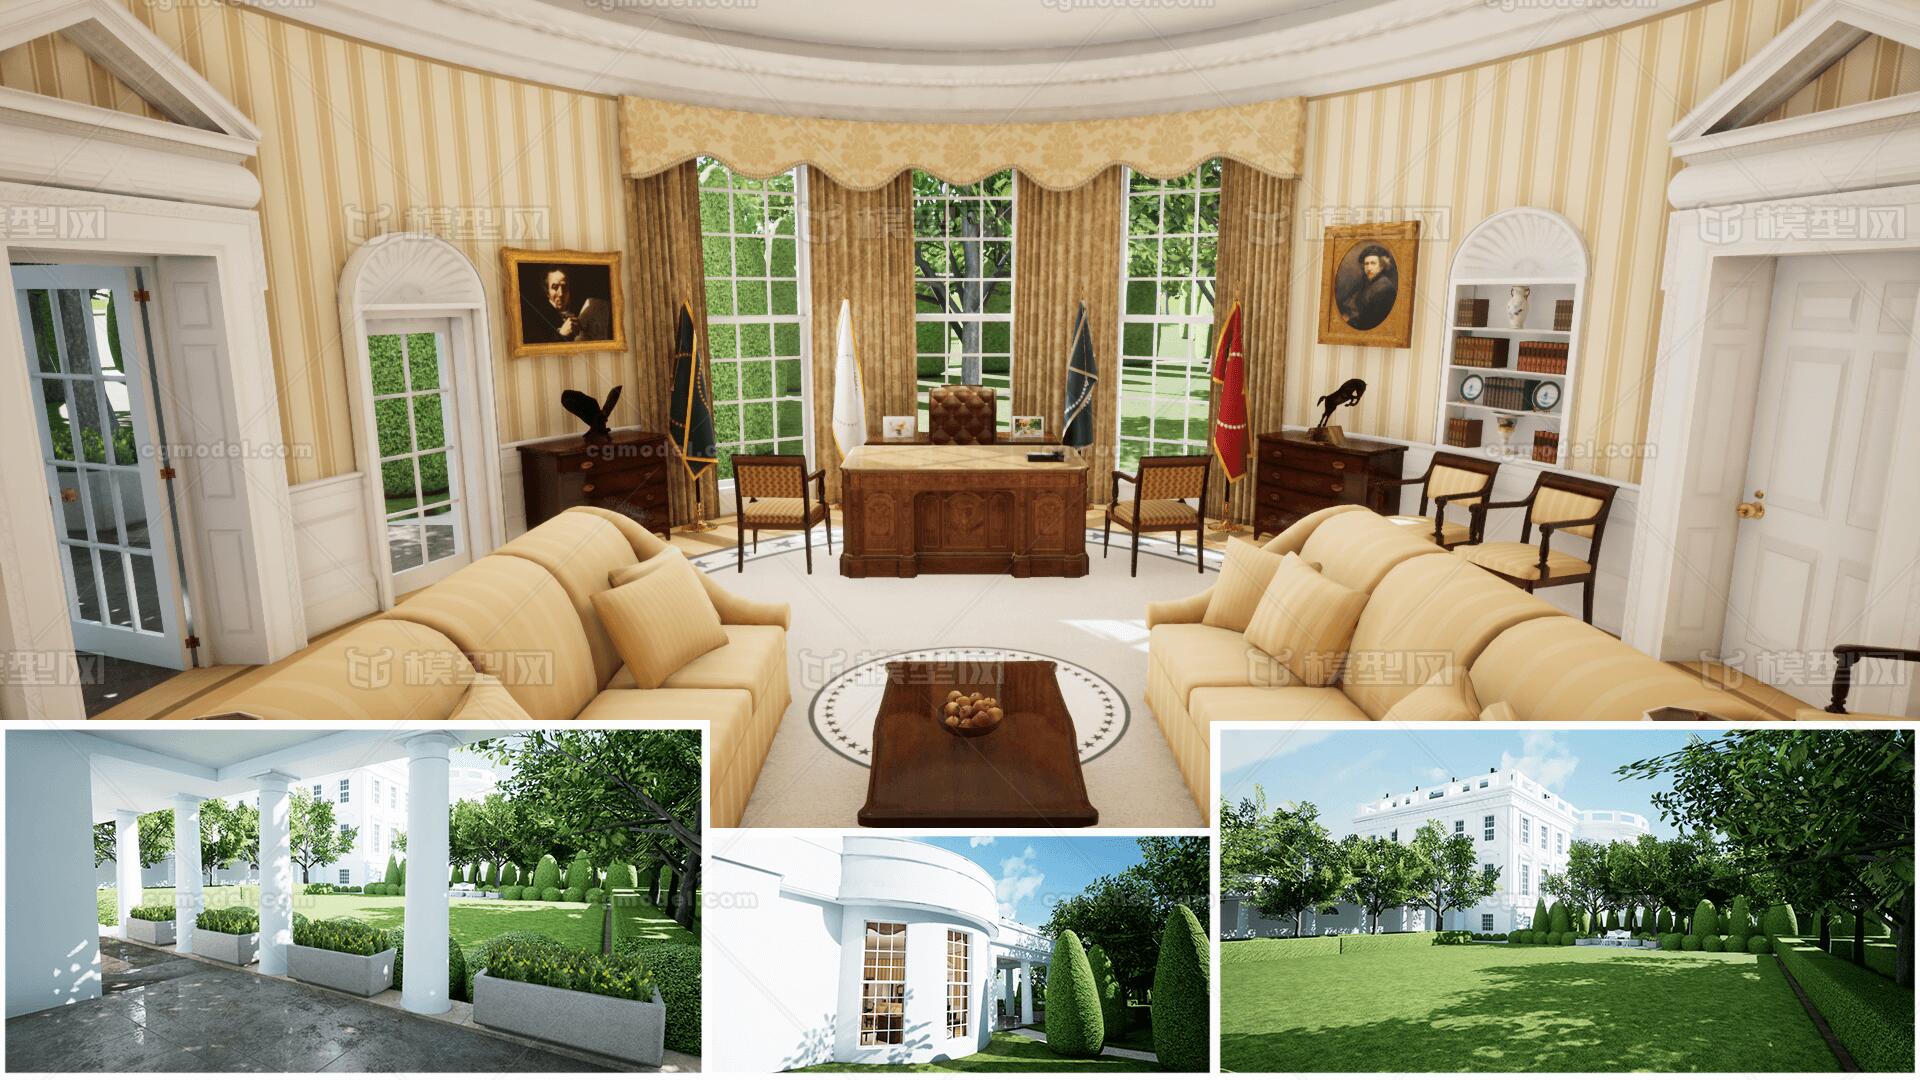 President Joe Biden's Oval Office decor: How it compares to Donald ...